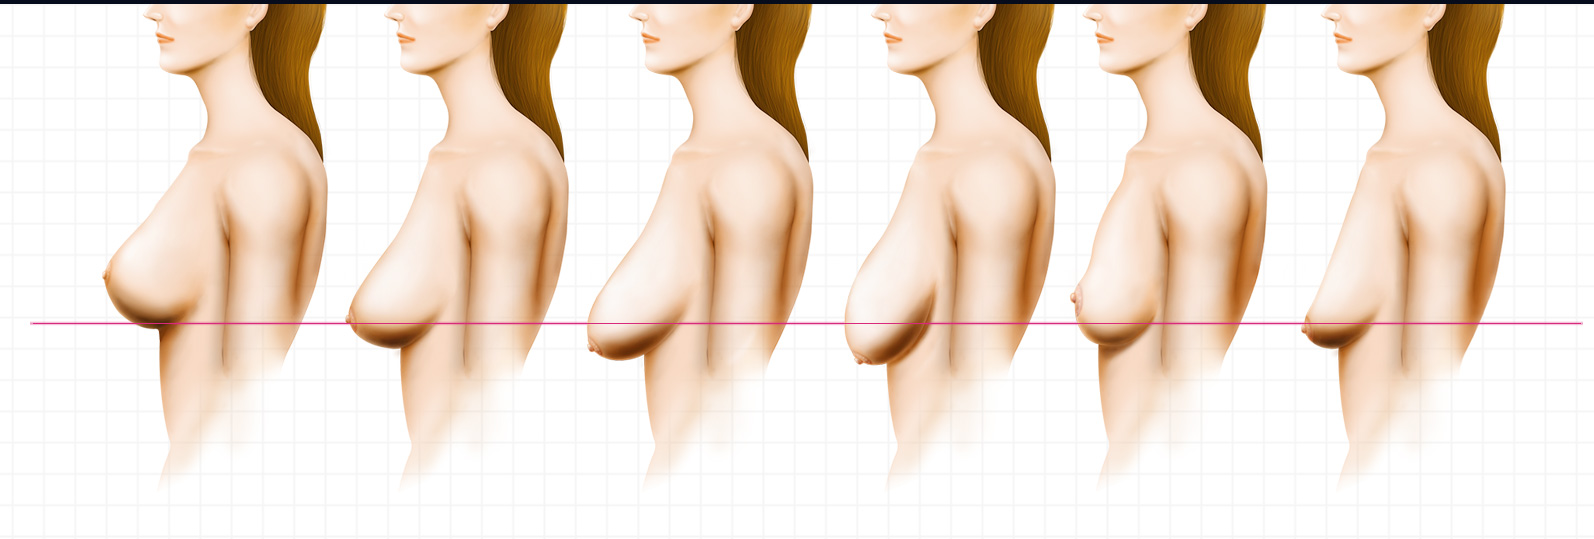 Self Diagnosis Method For Saggy Breasts